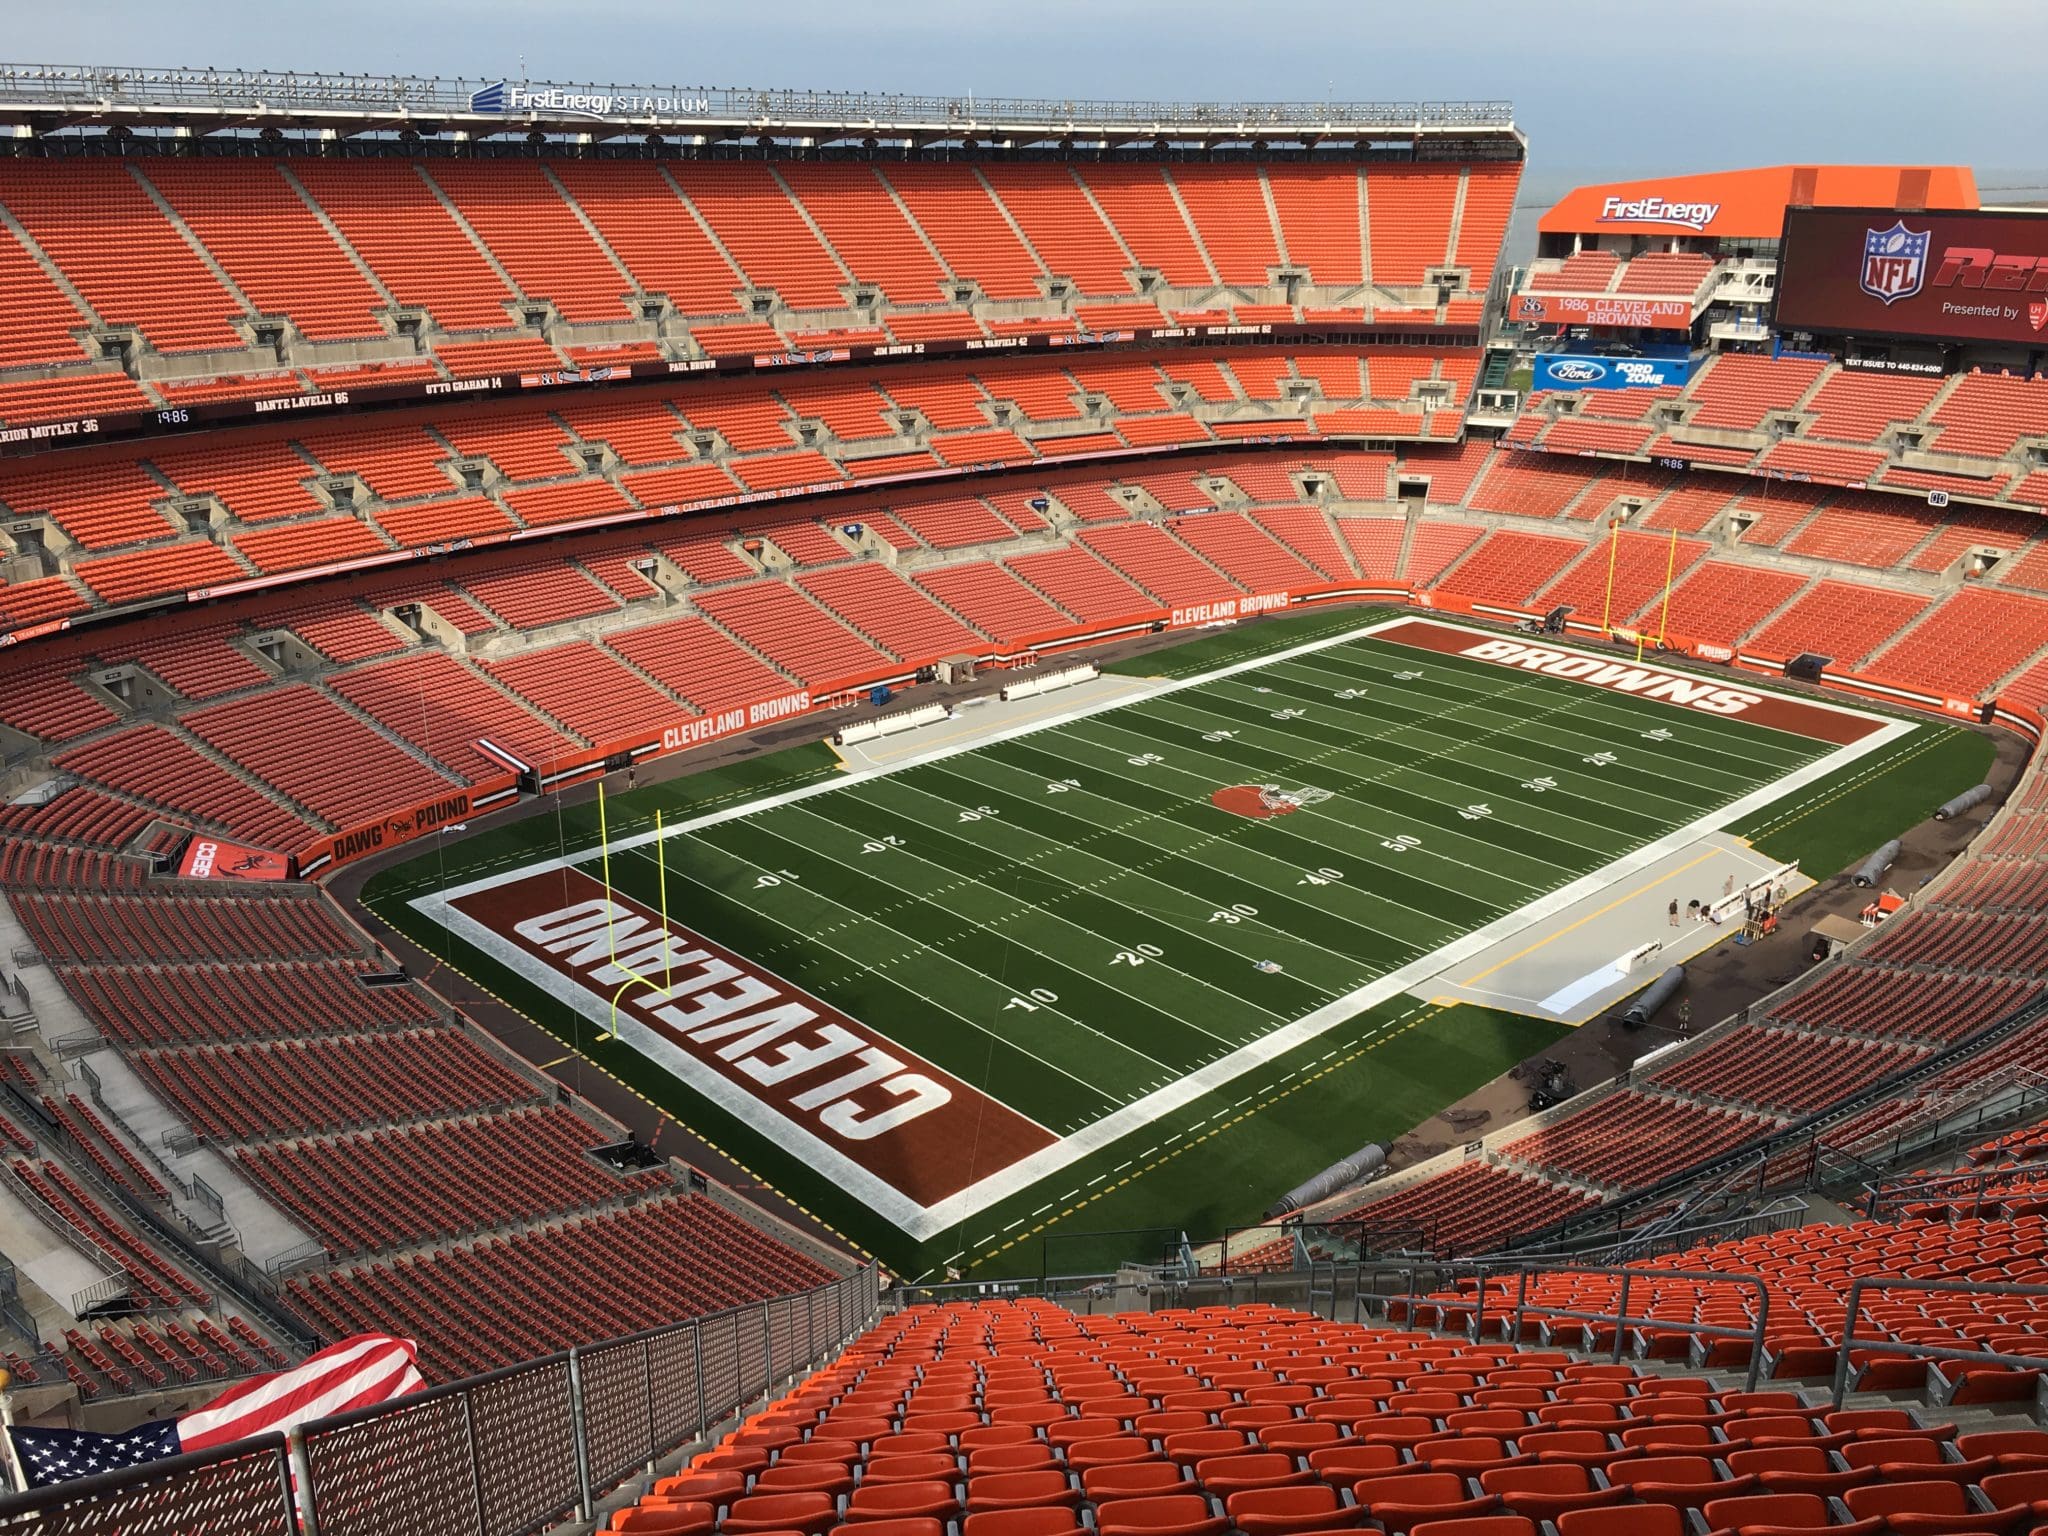 Report: Cleveland, Browns Agree to $1B Stadium Renovation